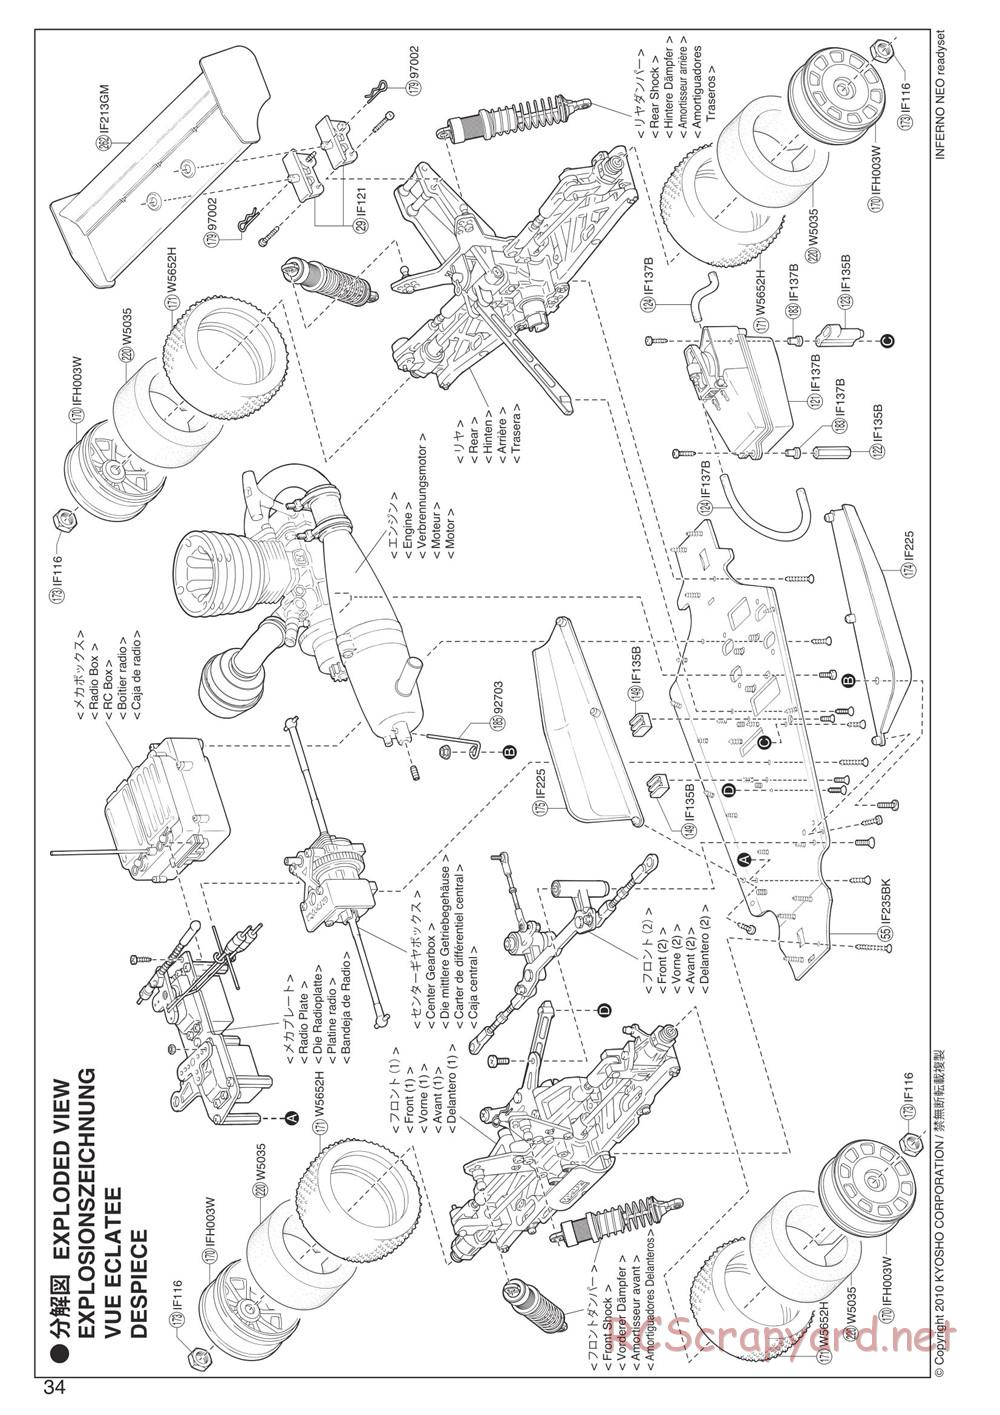 Kyosho - Inferno Neo - Manual - Page 34